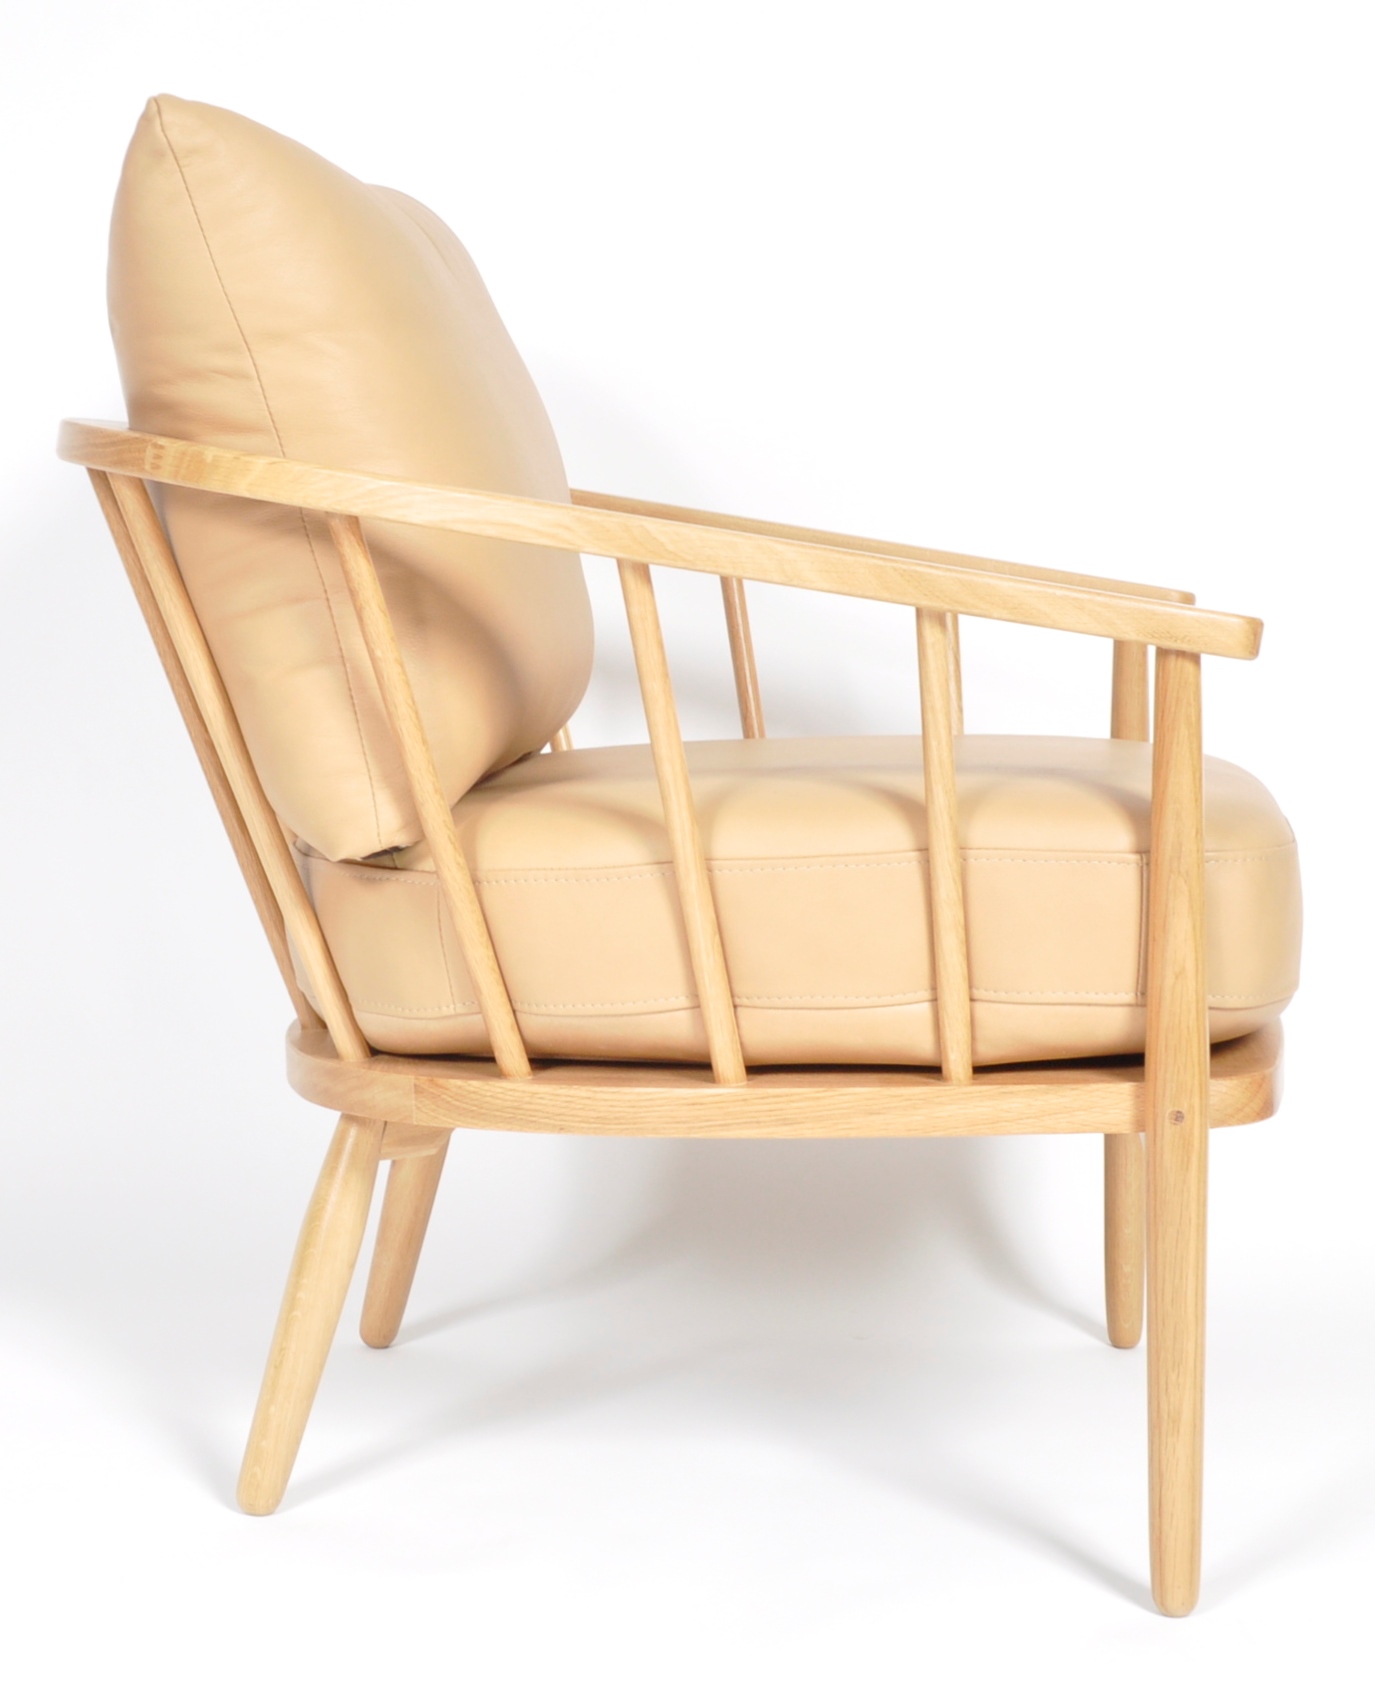 JOHN LEWIS - FROME CHAIR - CONTEMPORARY ARMCHAIR - Image 5 of 6